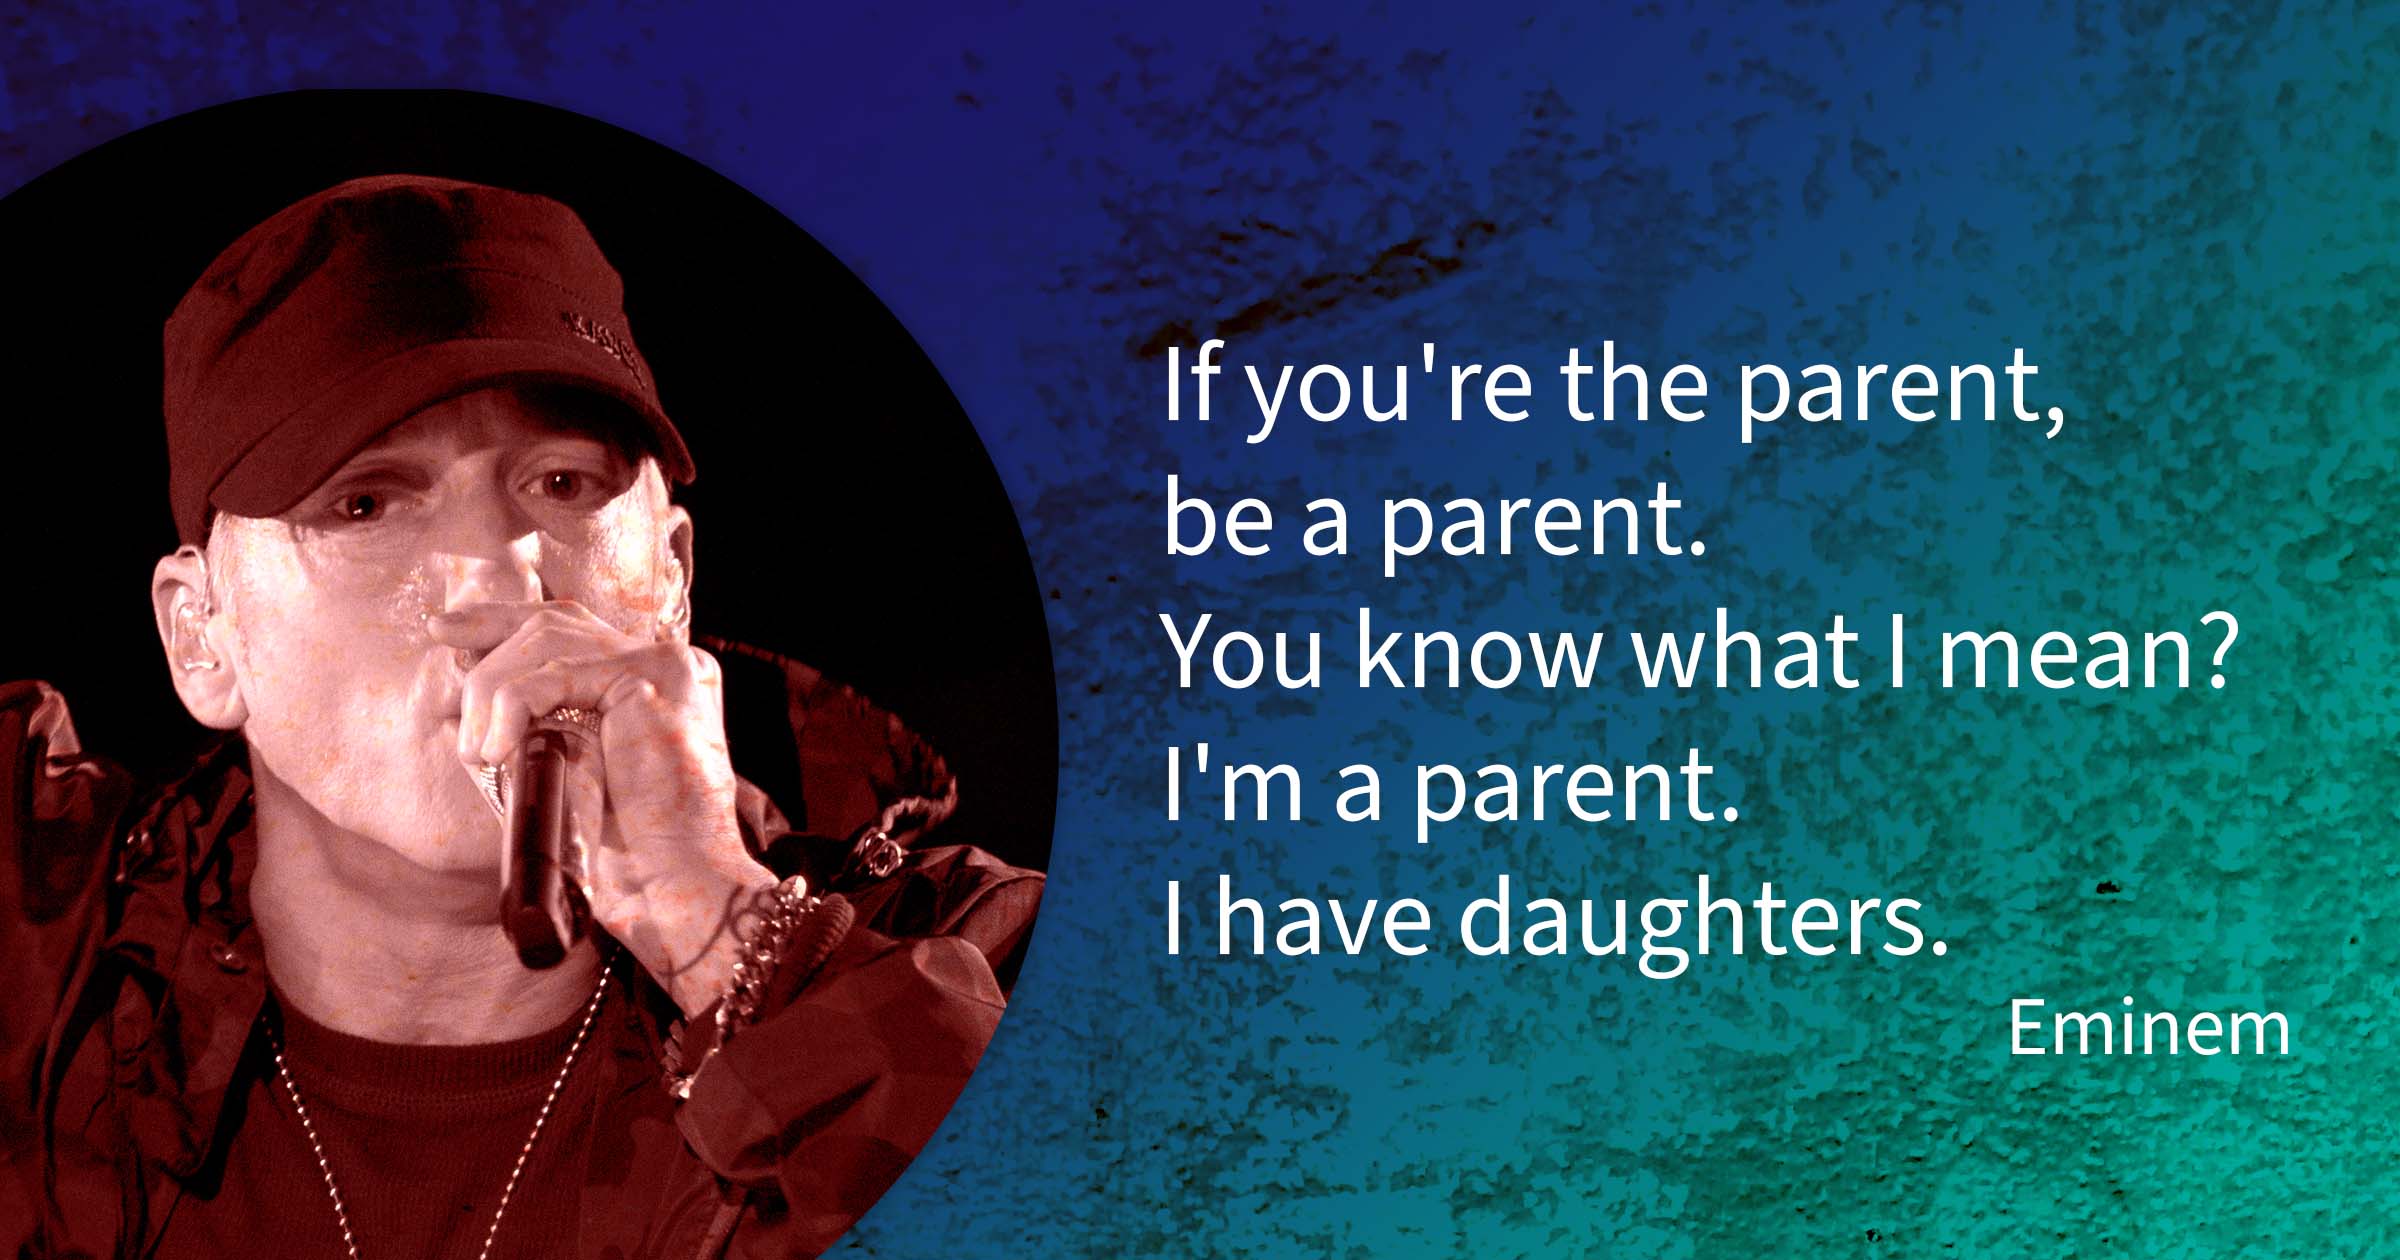 Eminem quote: If you're the parent, be a parent. You know what I mean? I'm a parent. I have daughters.